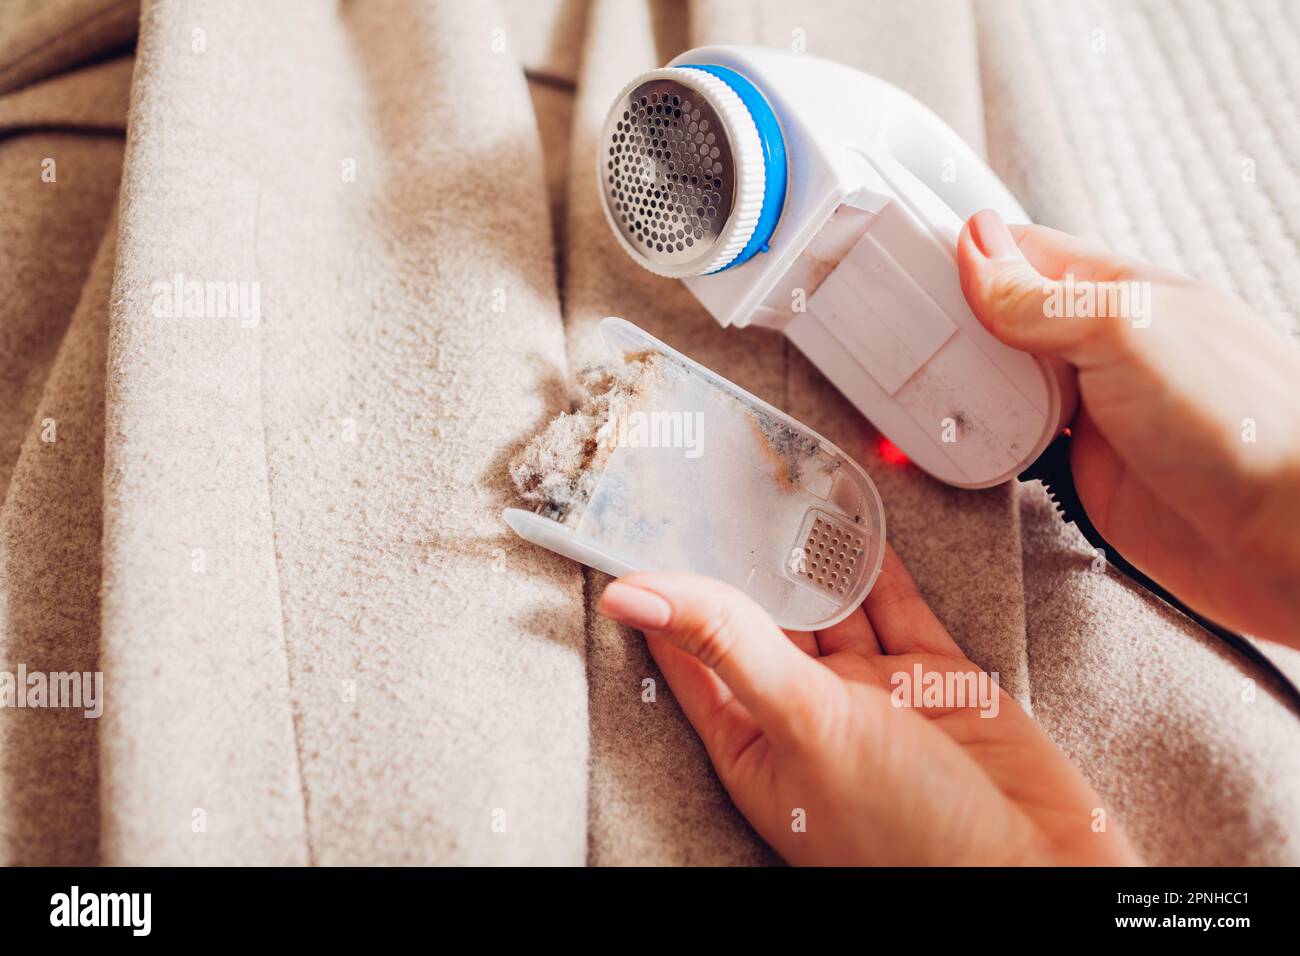 Cleaning lint remover after shaving fuzz on garment. Taking off container full of trimmed pilling and dirt. Taking care of device Stock Photo